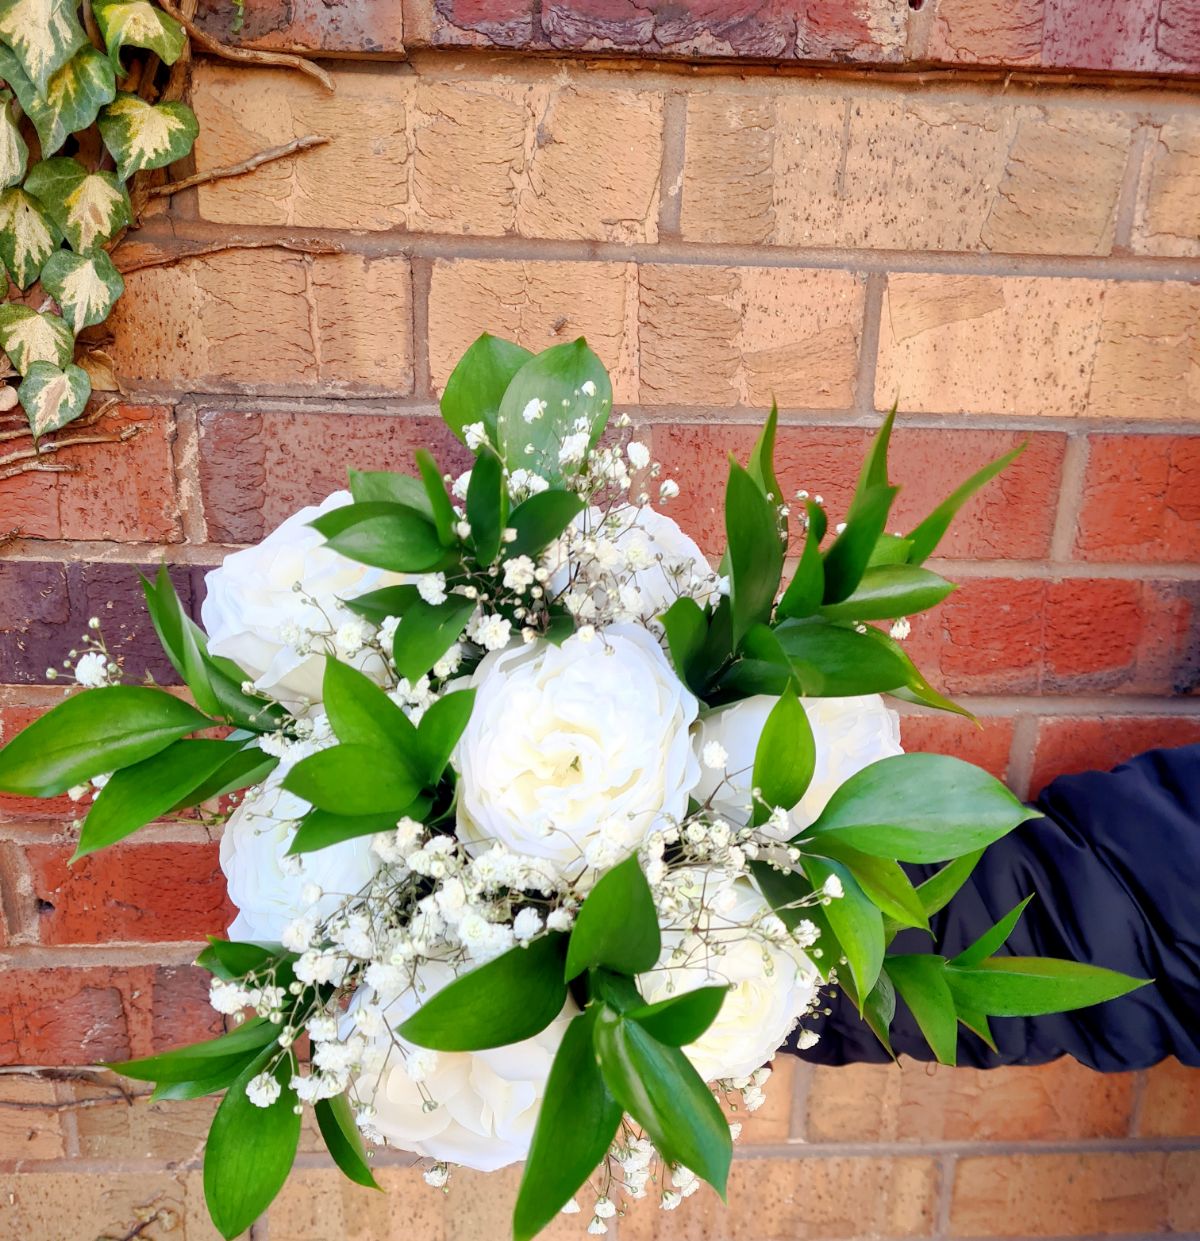 Hybrid Bridesmaid Bouquet- Fresh Greenery artificial Blooms